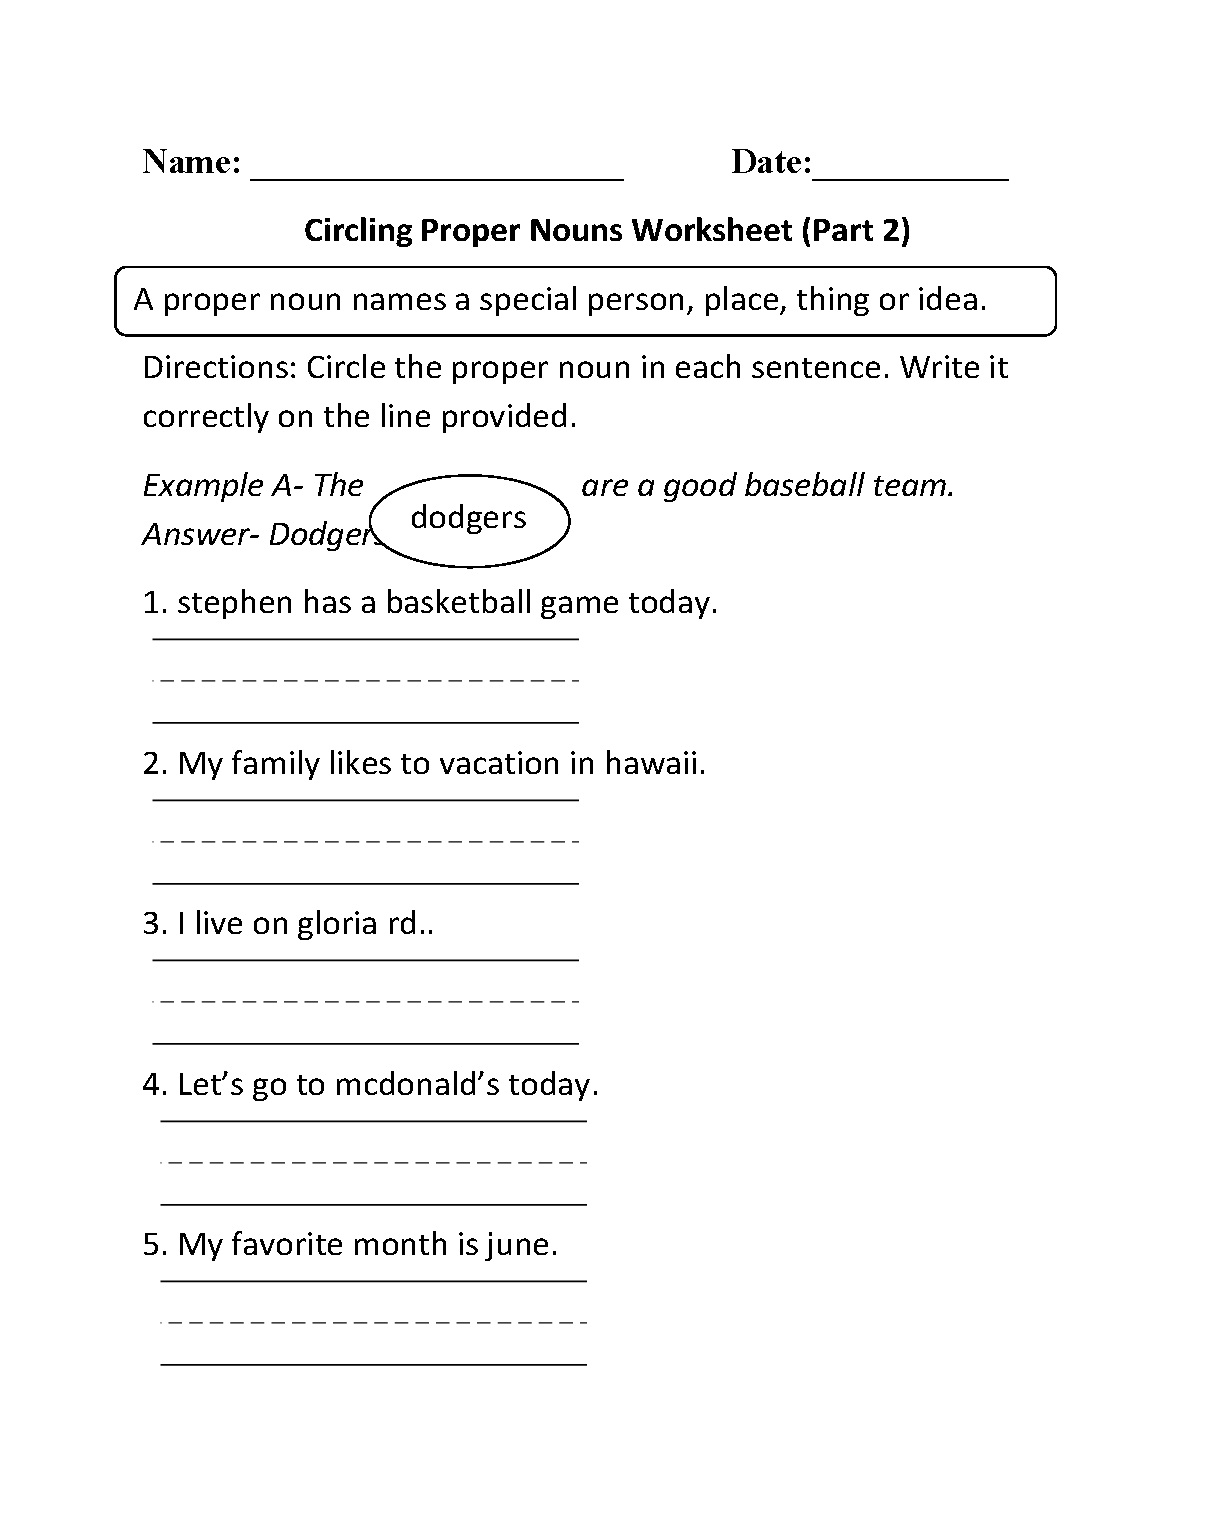 nouns-worksheets-proper-and-common-nouns-worksheets-db-excel